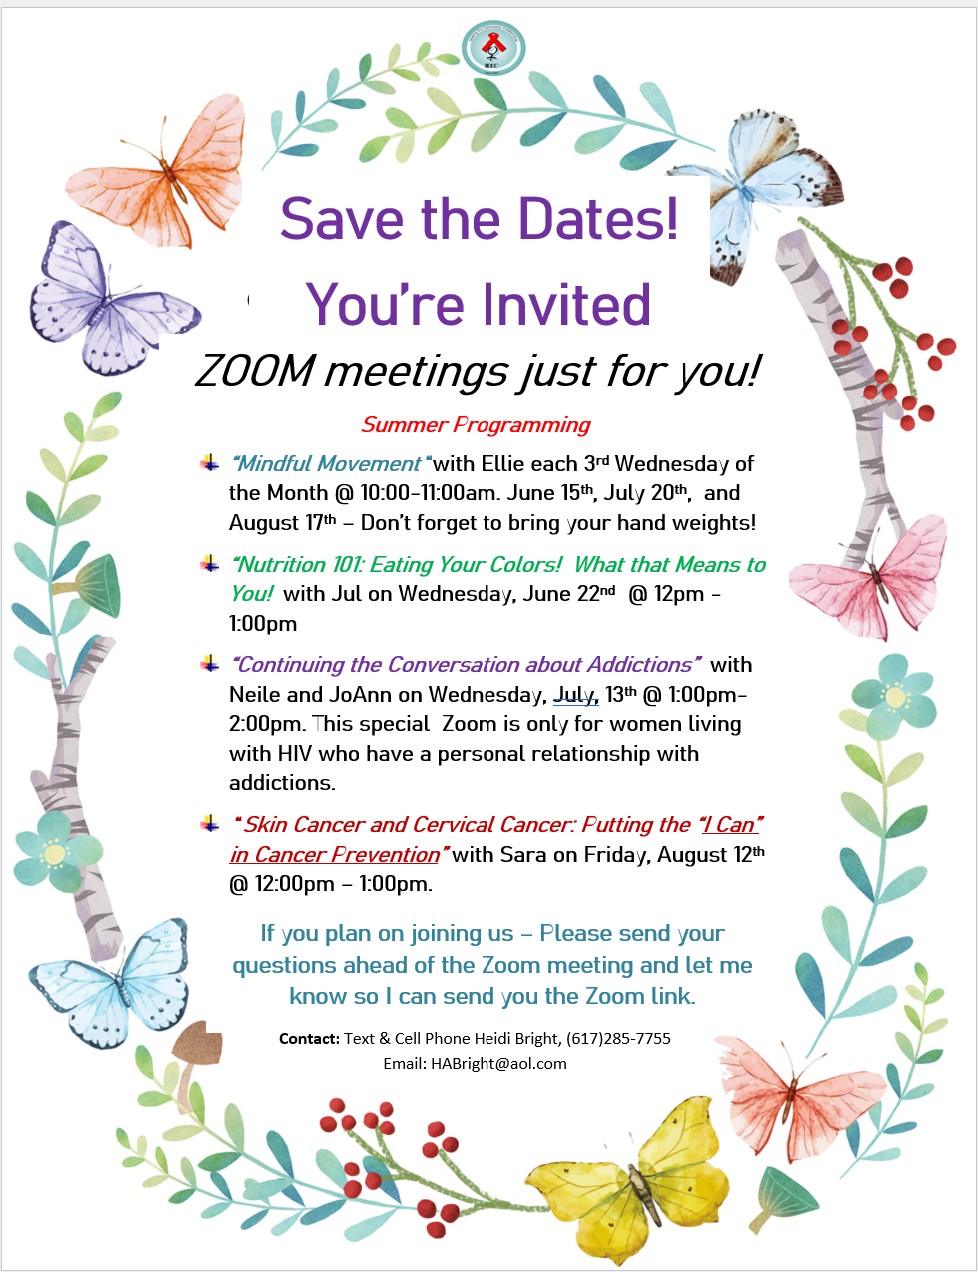 Save the Date: Zoom “Mindful Movement”   August 17th – Don’t forget to bring your hand weights!